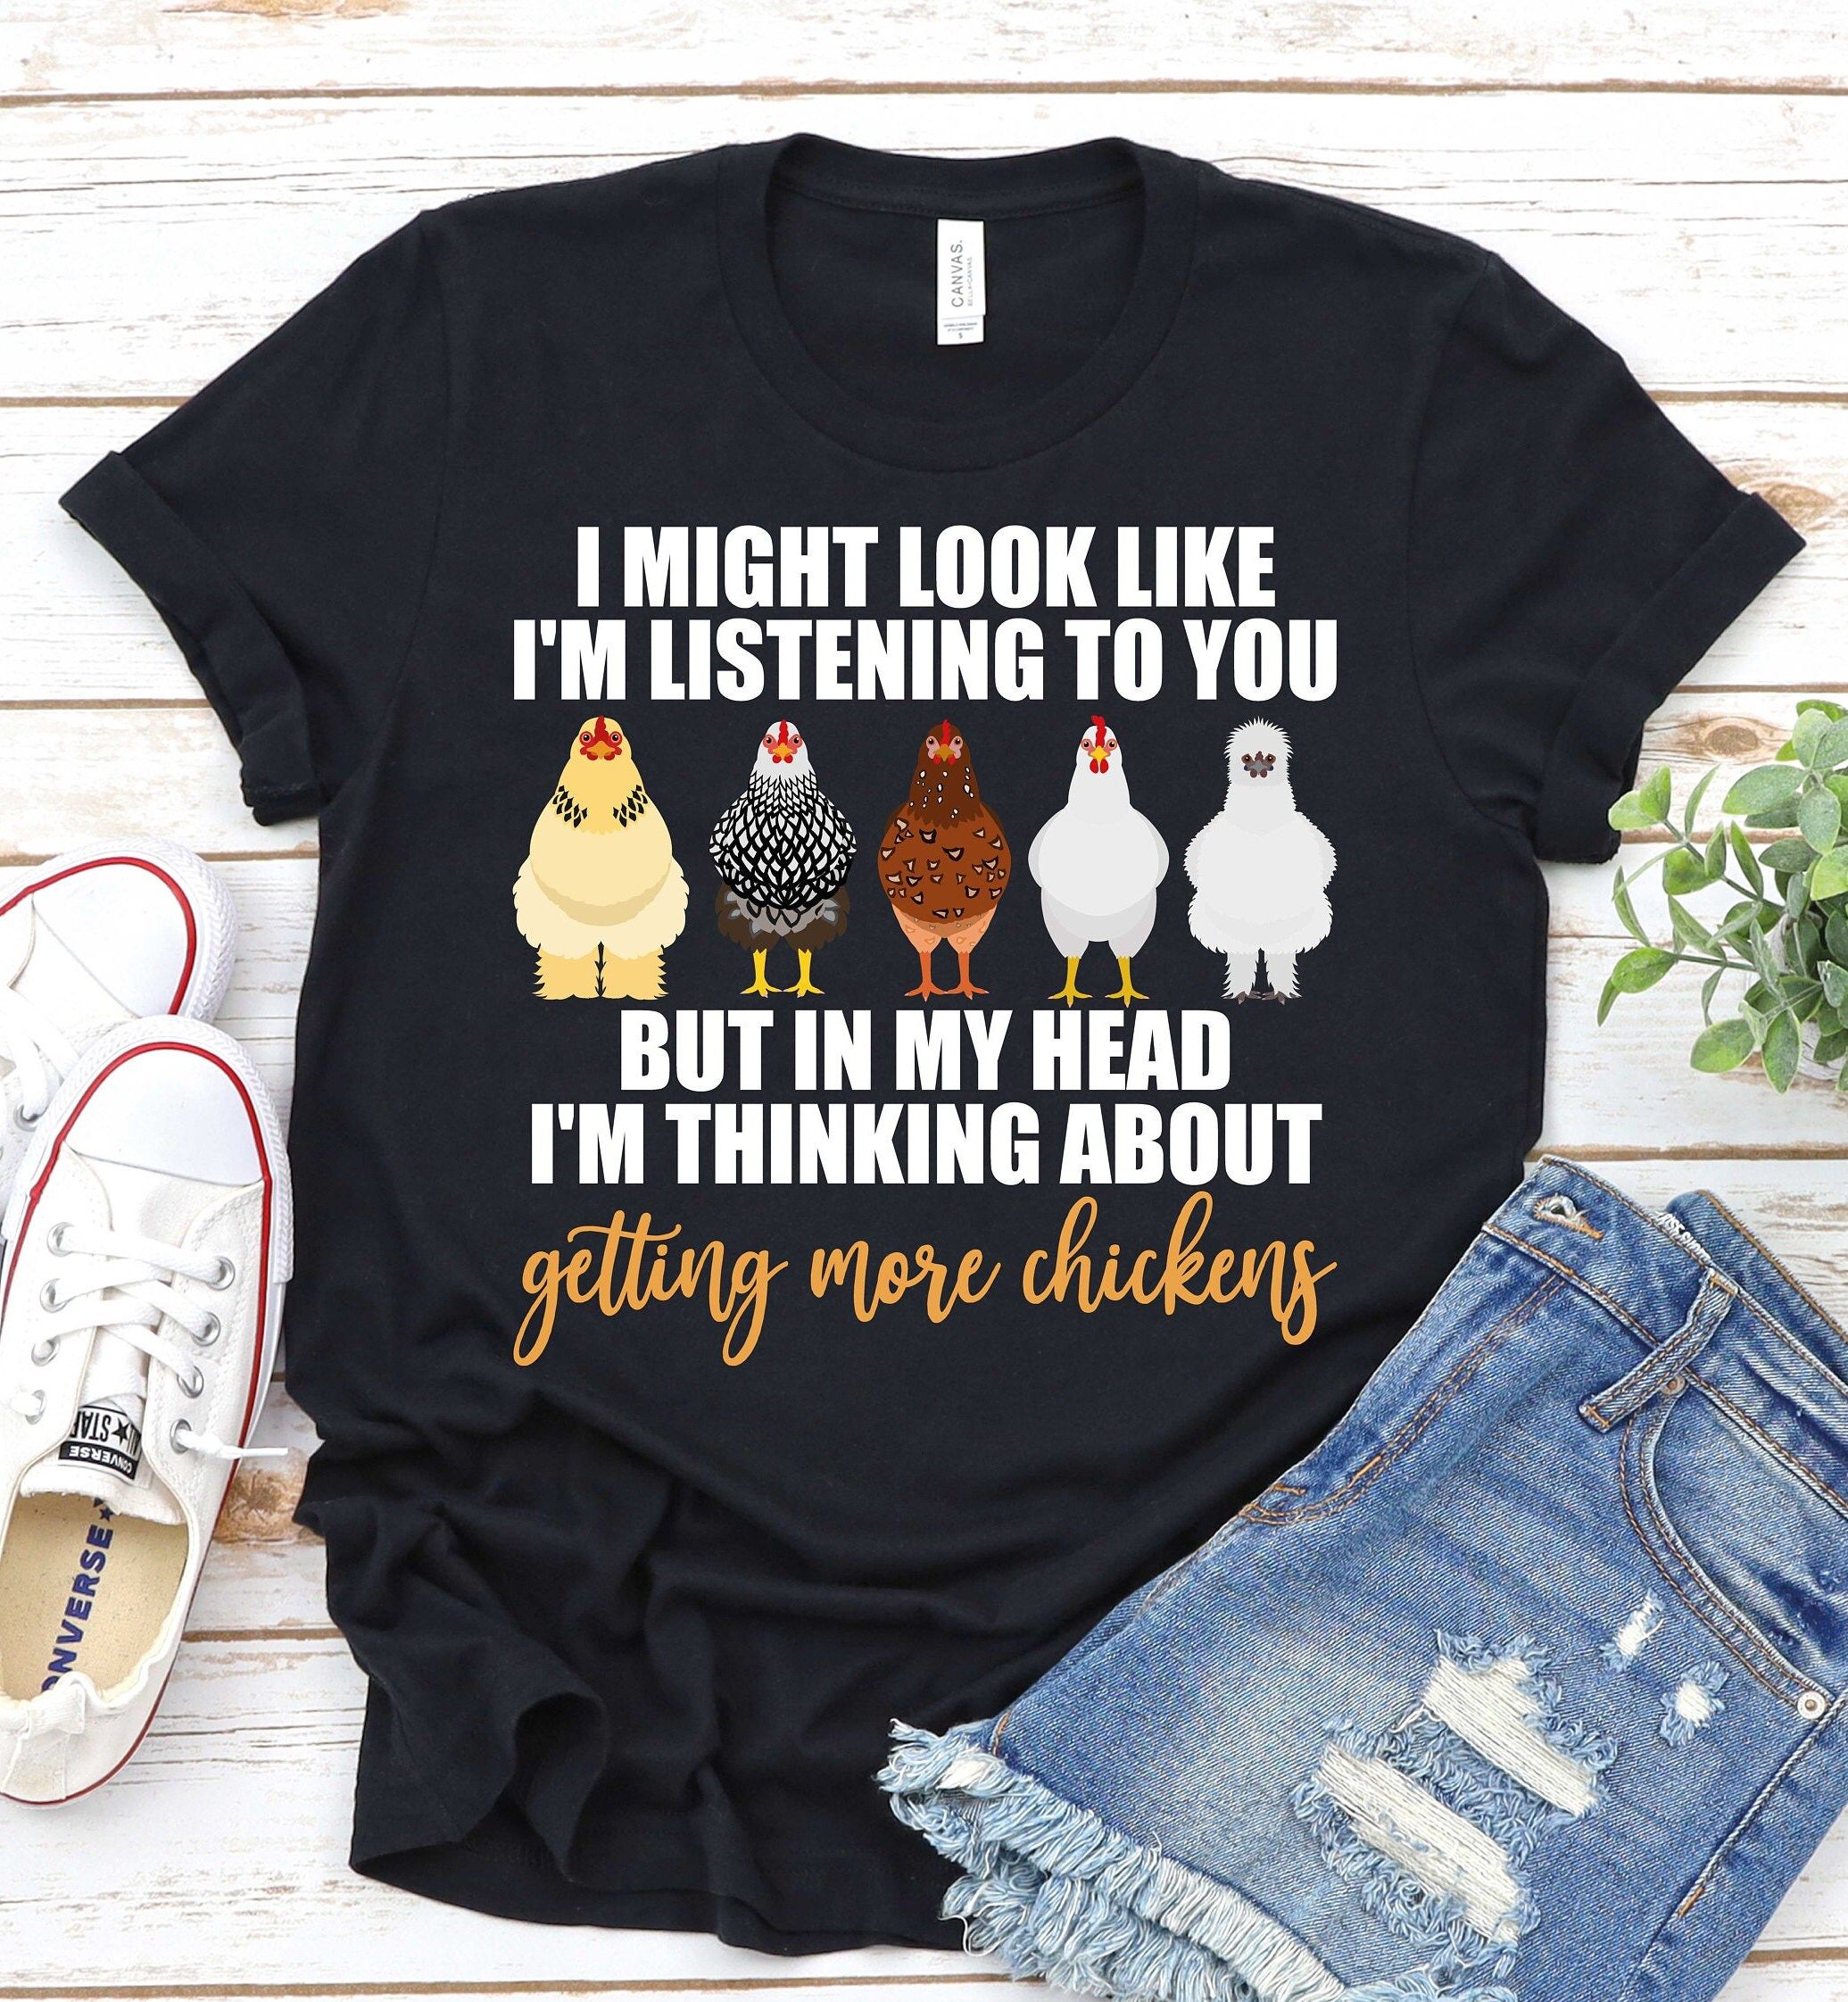 Funny Graphic Tee Outfit Ideas
  for Ladies